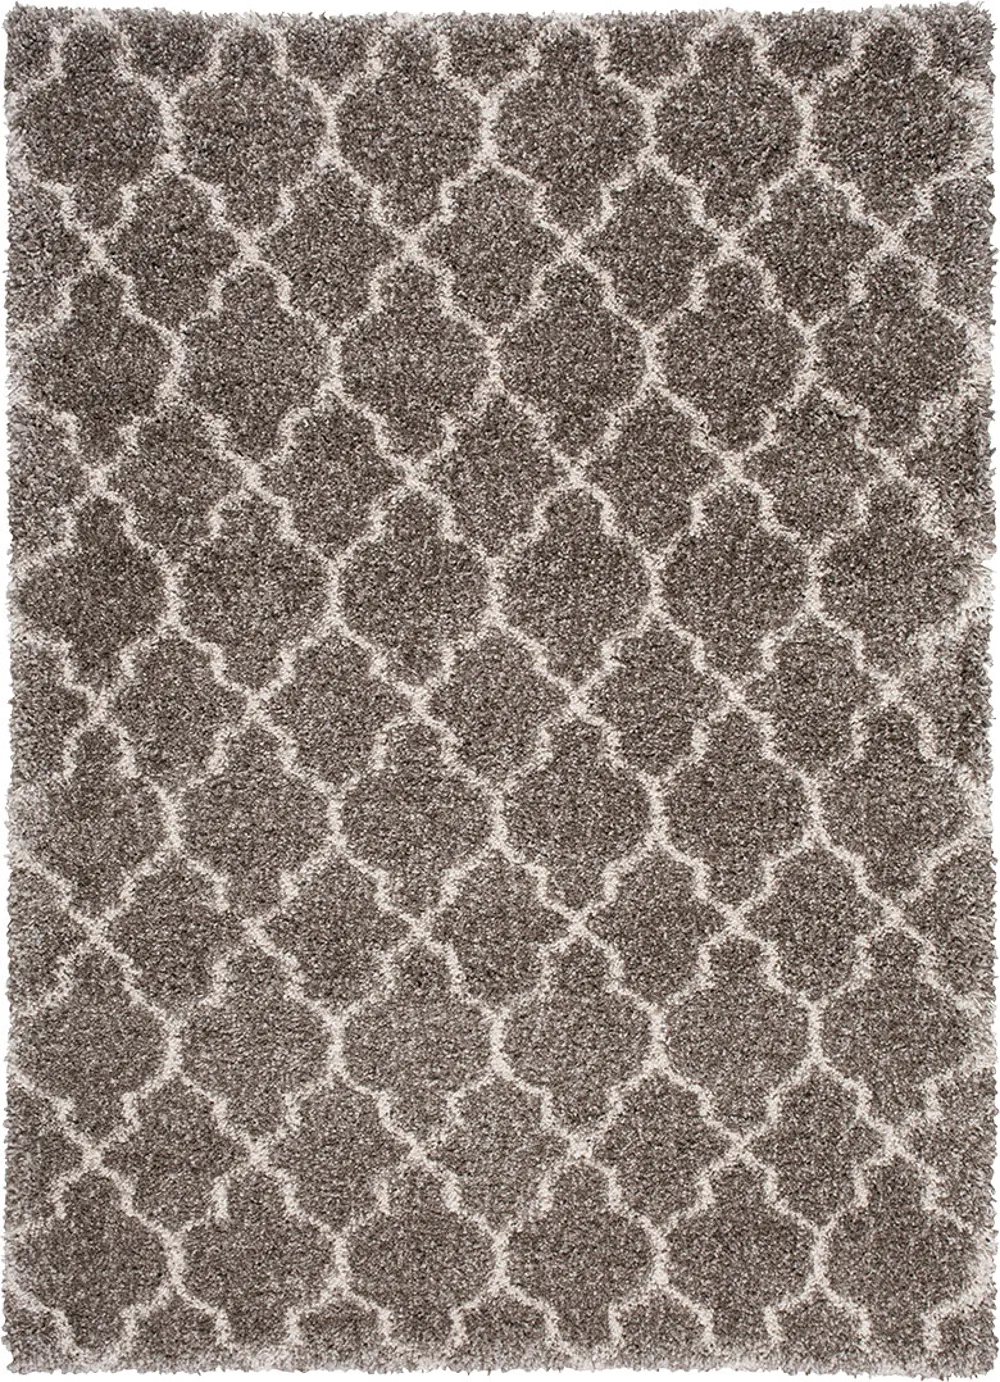 Amore 5 x 7 Stone Gray Area Rug-1